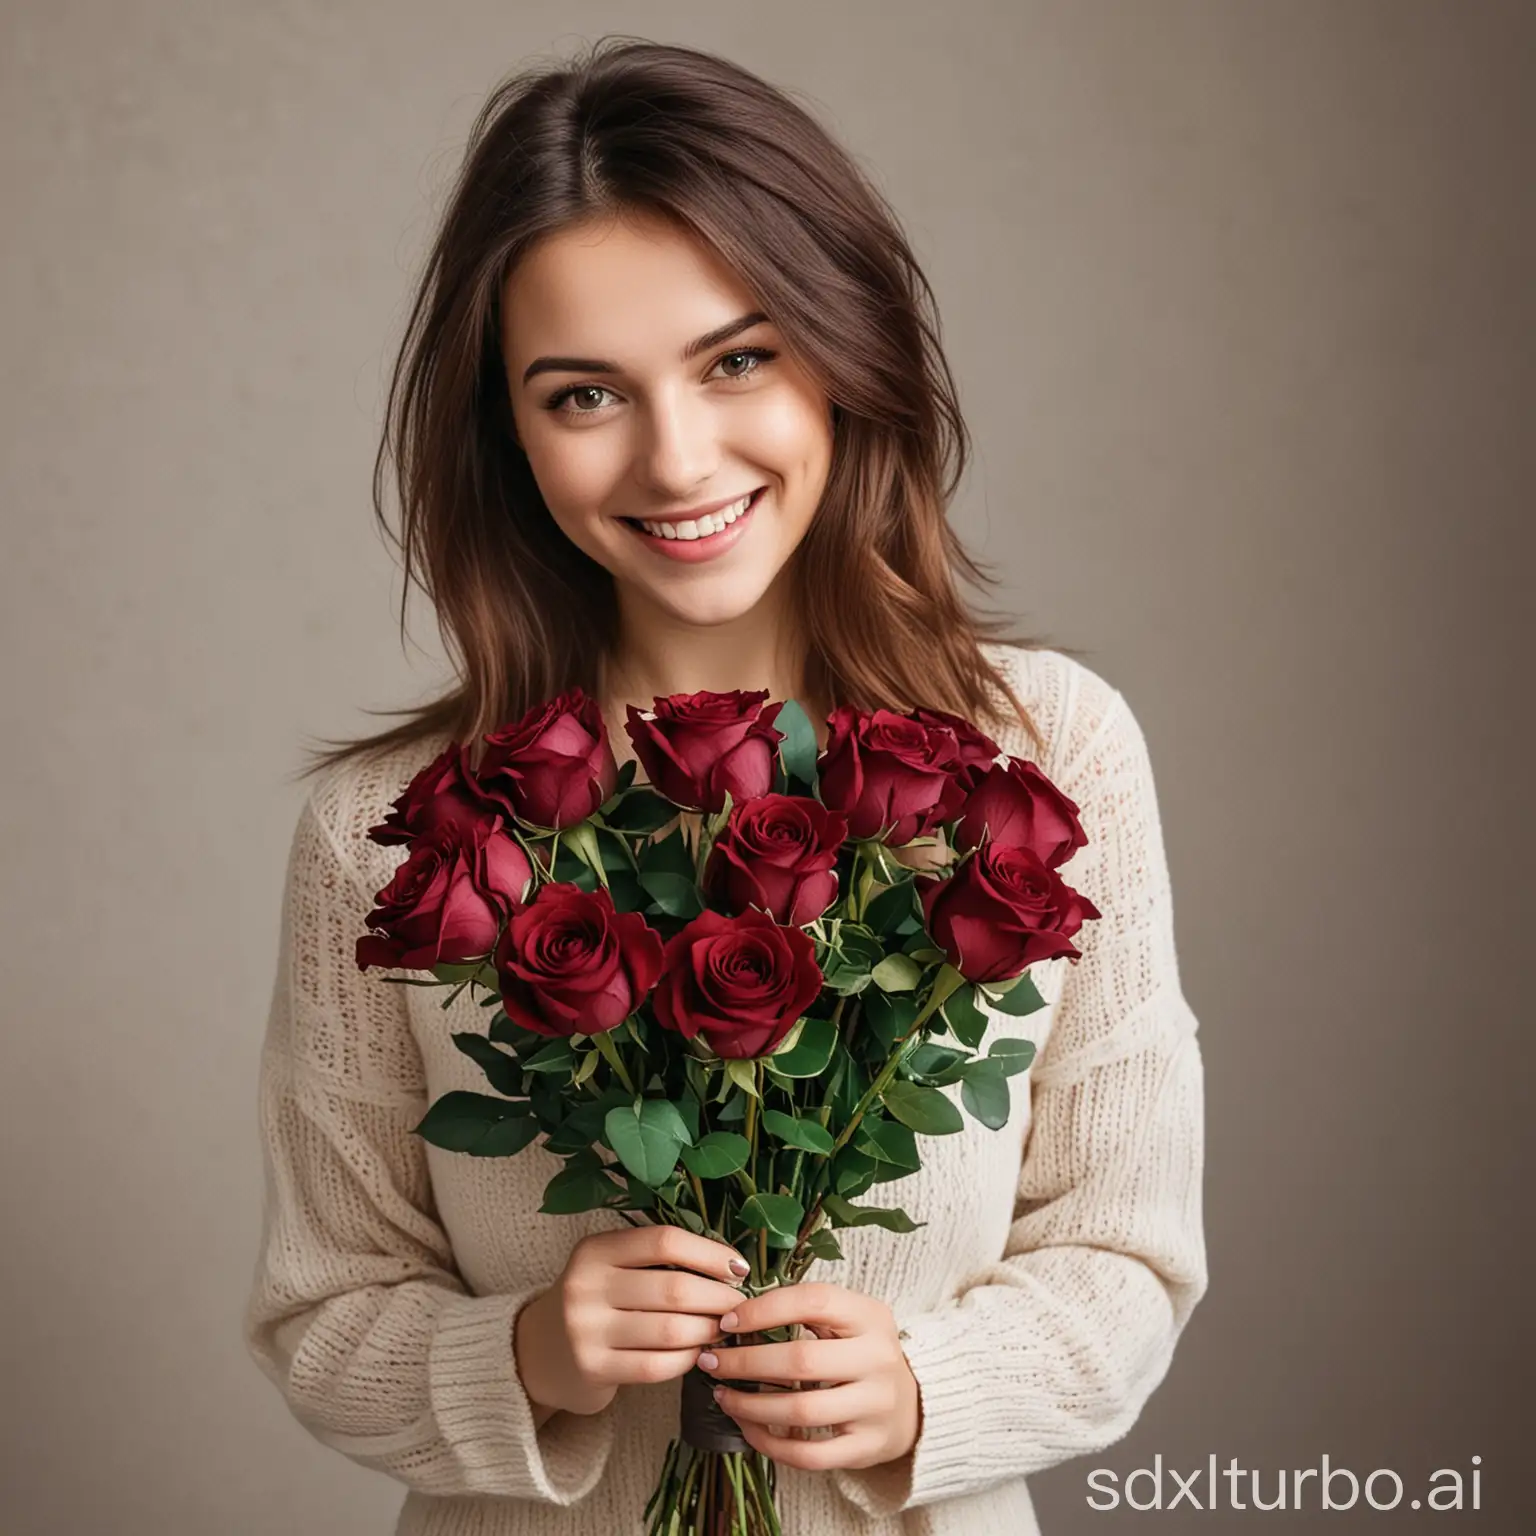 The girl holds a bouquet of burgundy roses to herself and smiles